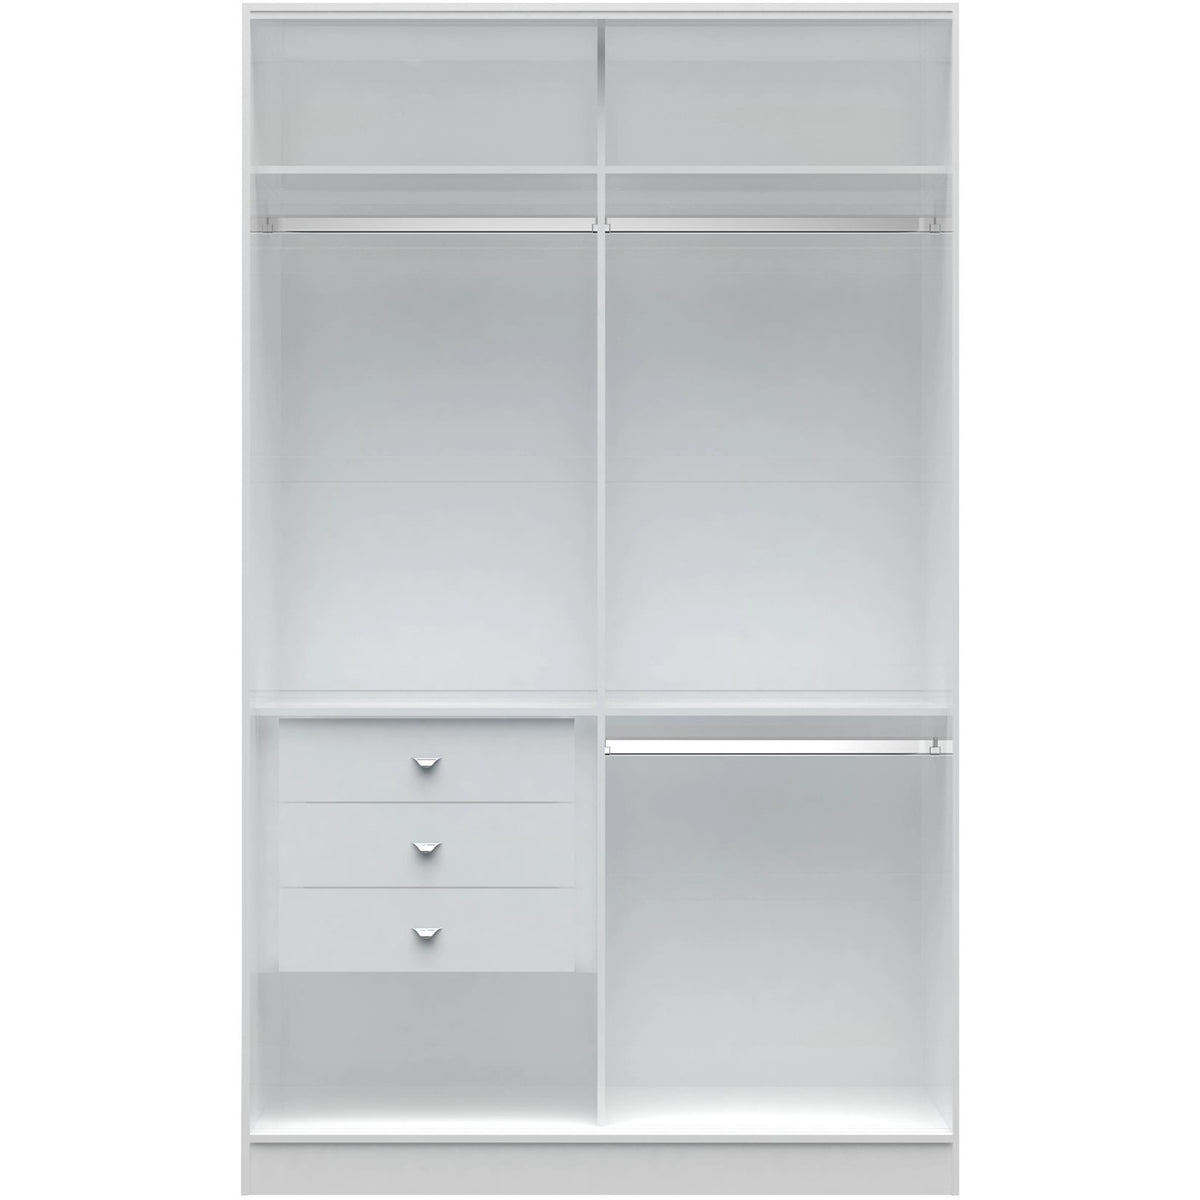 Manhattan Comfort Chelsea 1.0 - 54.33 inch Wide Double Basic Wardrobe with 3 Drawers in White-Minimal & Modern